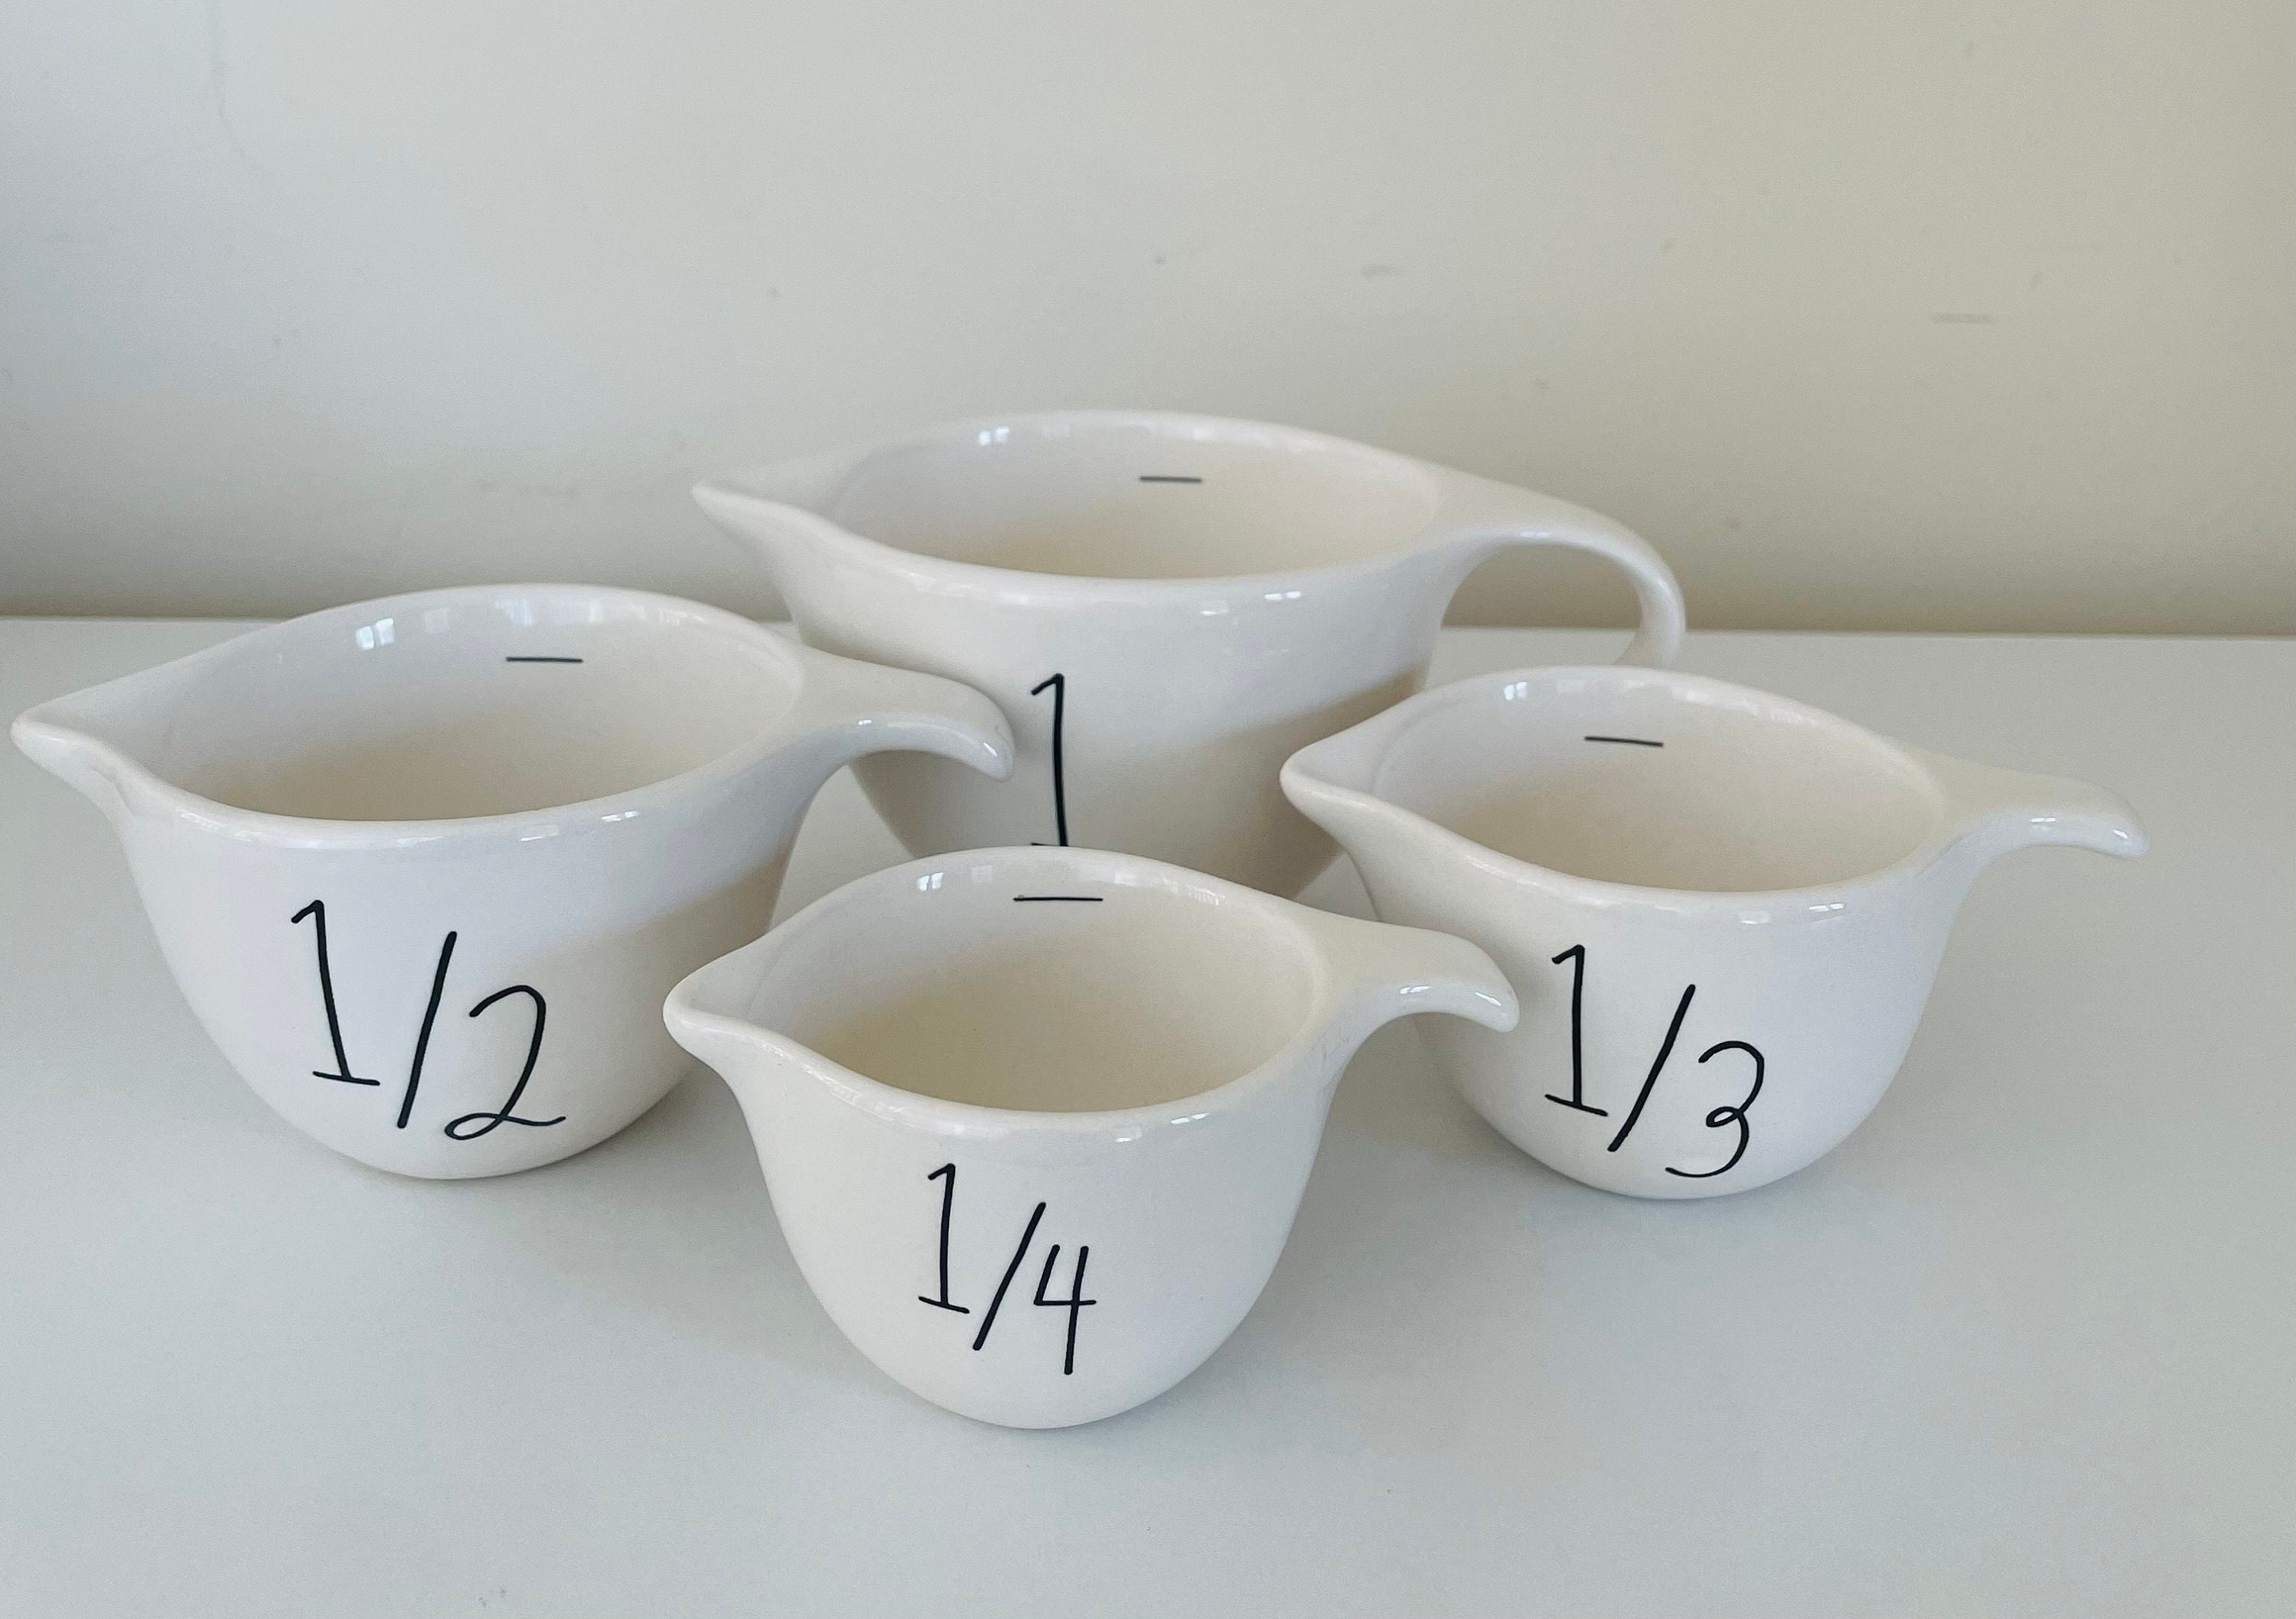 3x Rae Dunn Measuring Cups Bundle Deal - 3 Different Measuring Cup Sets